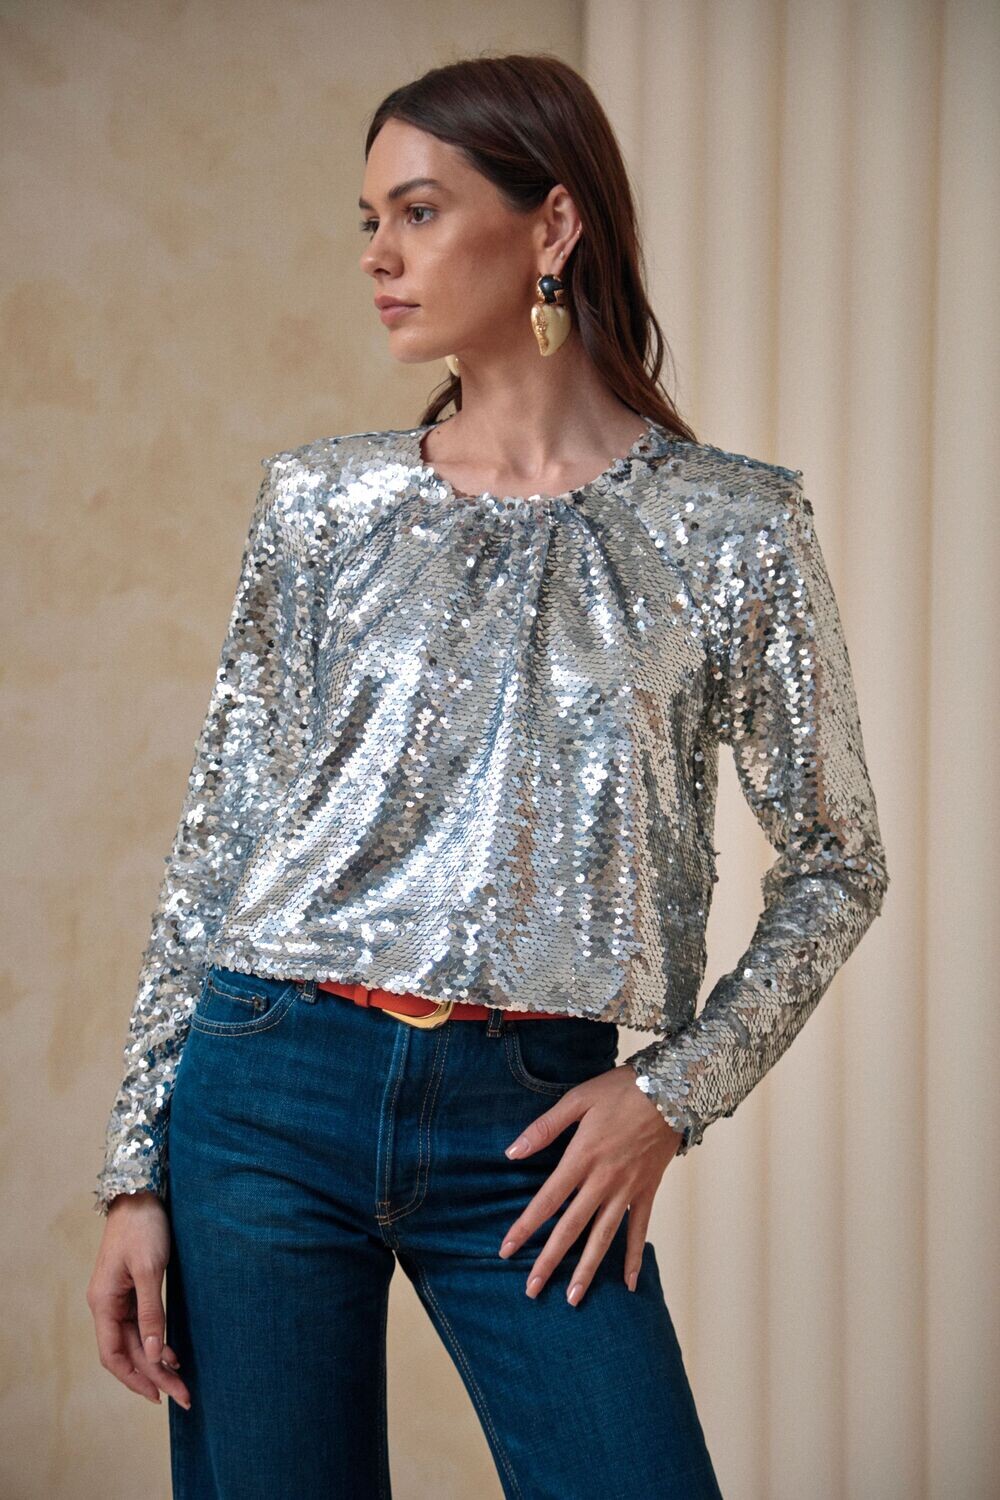 Hunter Bell Libby Top in Silver Sequin